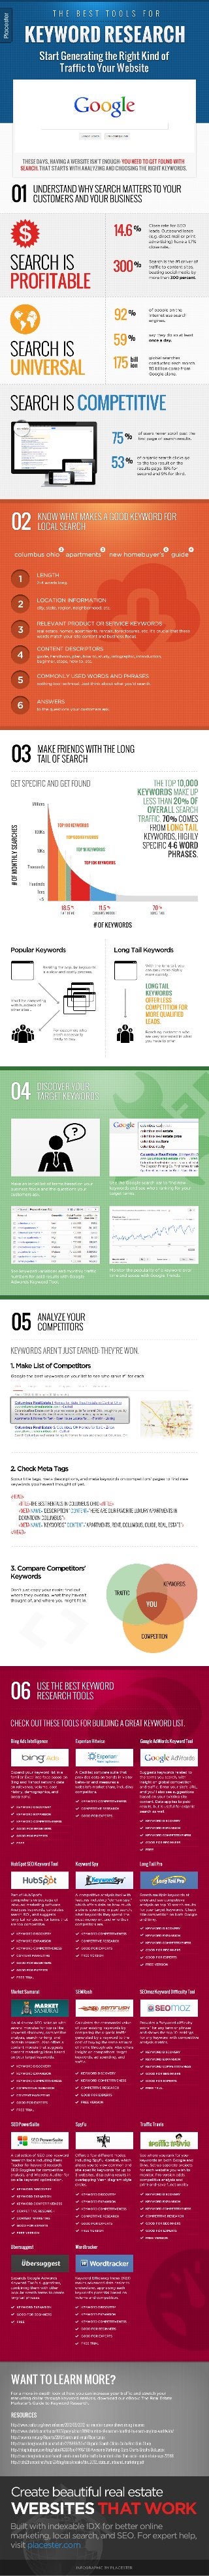 [Infographic] The Best Tools for Keyword Research